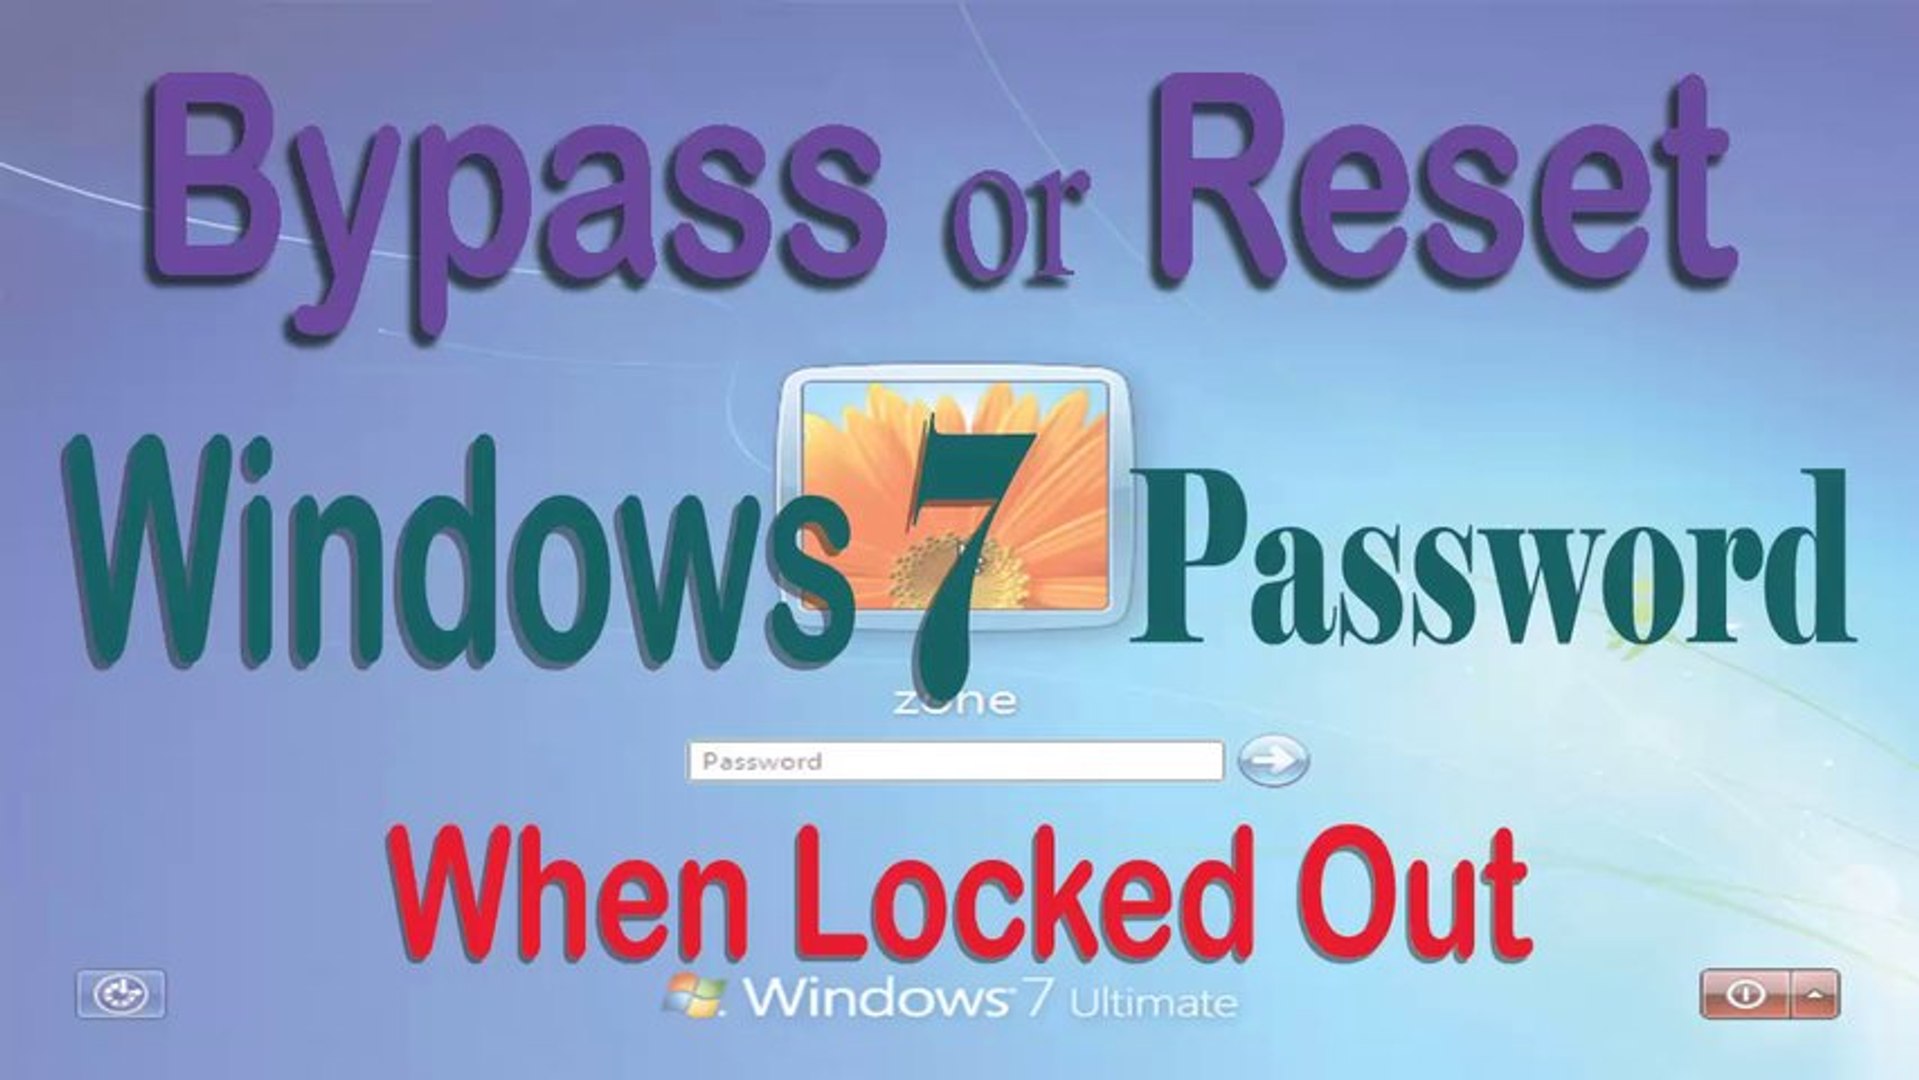 Bypass or Reset Windows 23 password when locked out of Computer